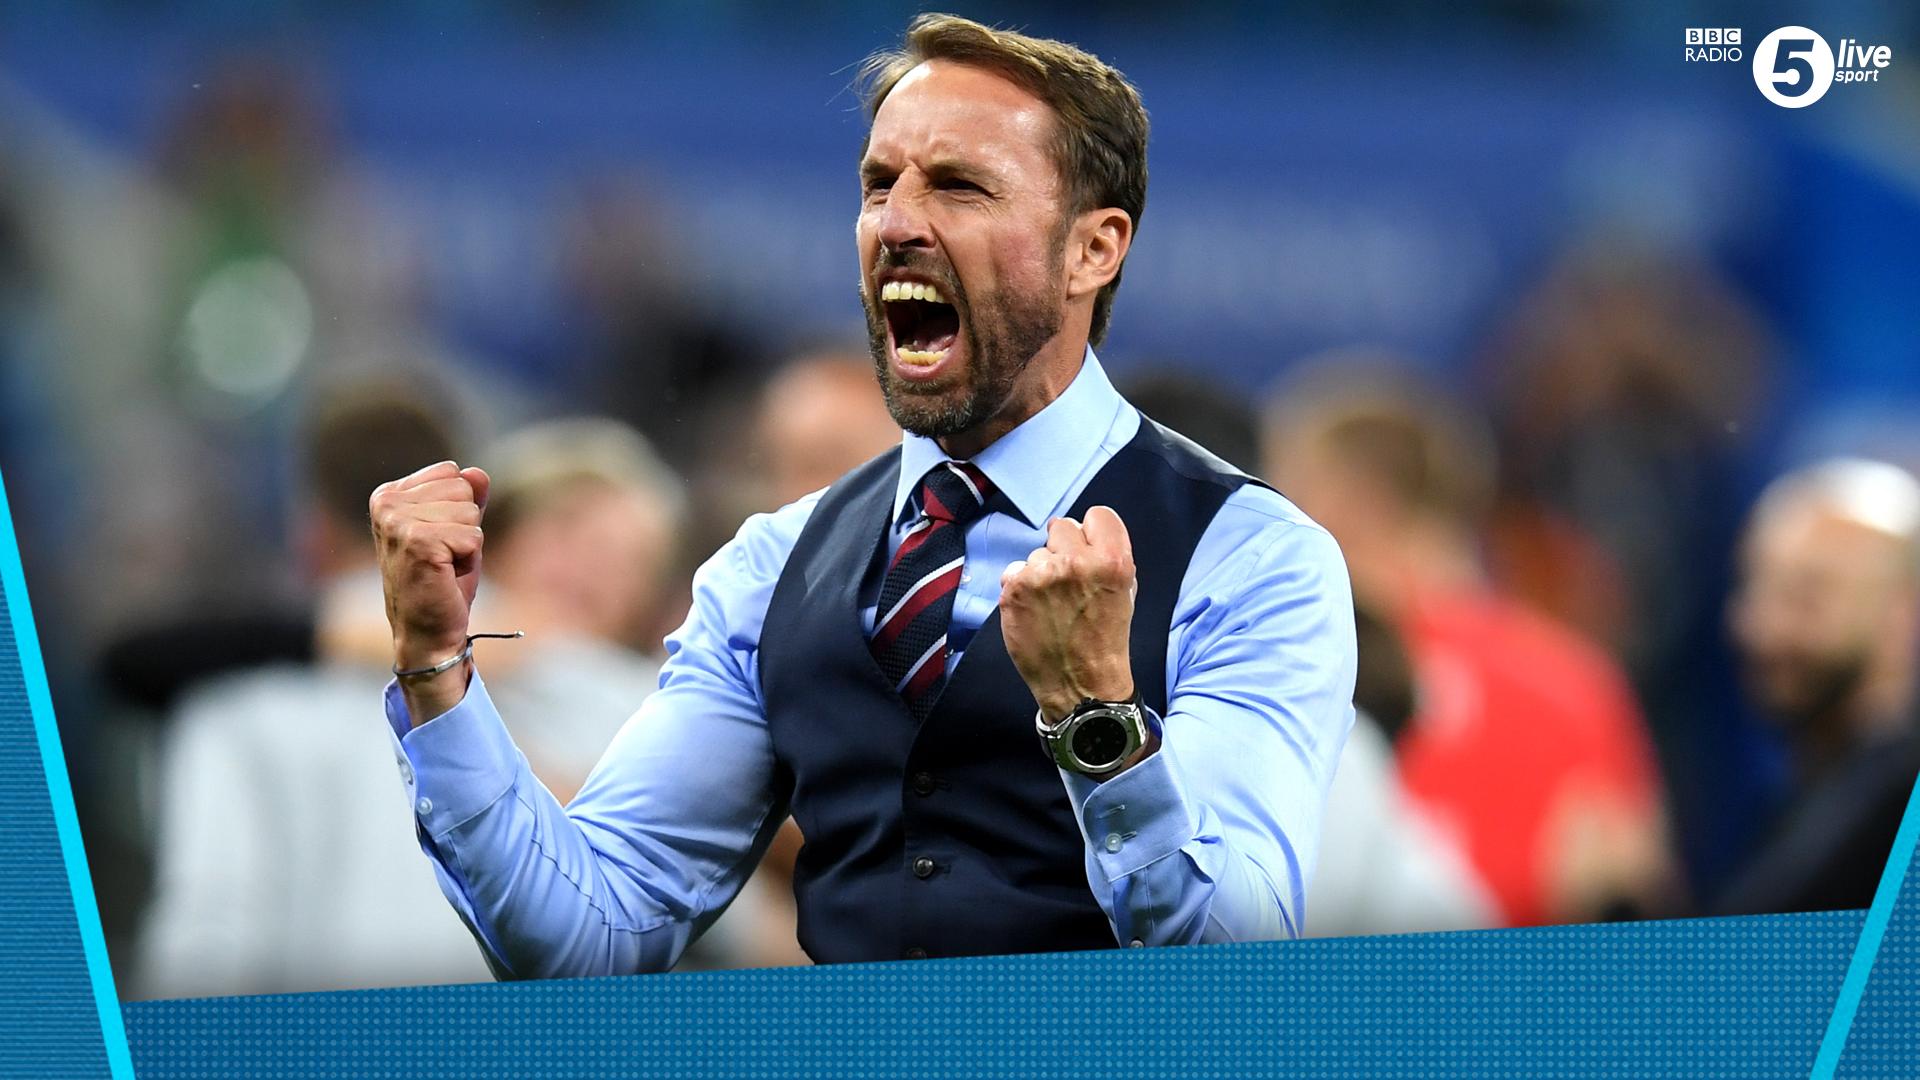 When it\s time to open your presents  Happy birthday, Gareth Southgate!

The boss turns 49 today  